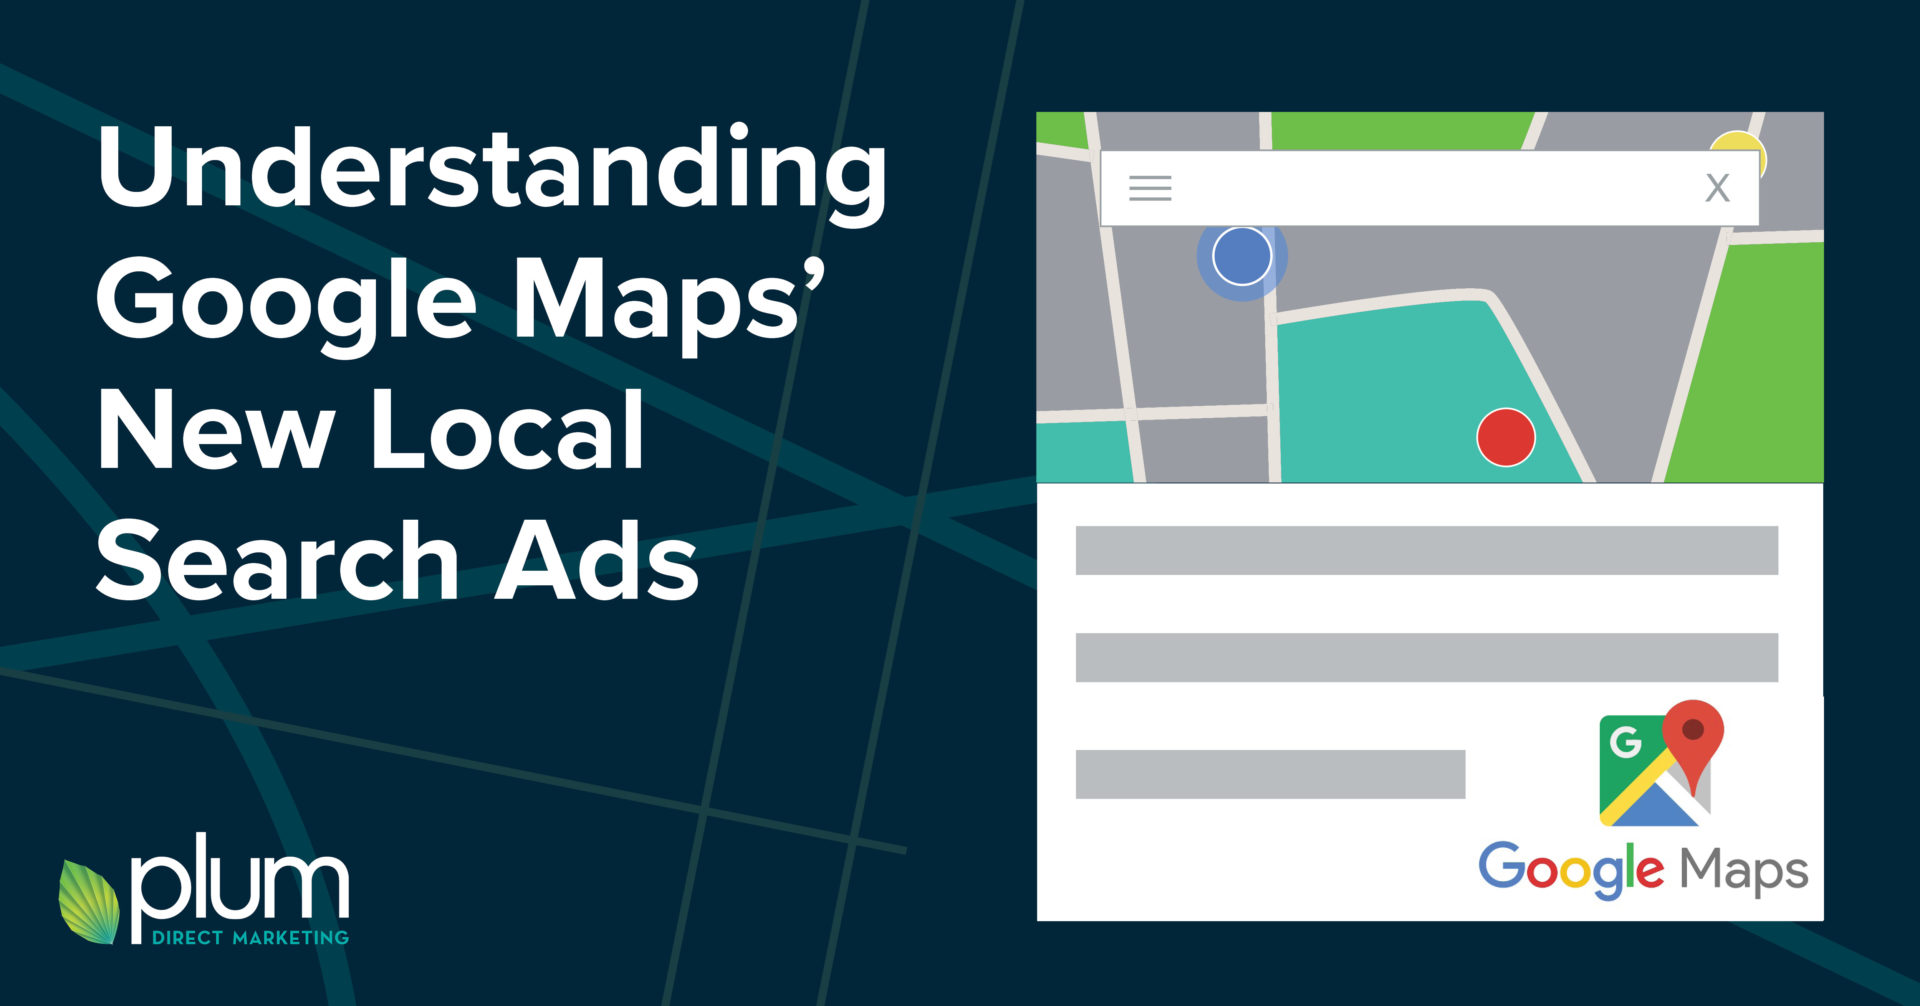 Understanding Google Maps’ New Local Search Ads